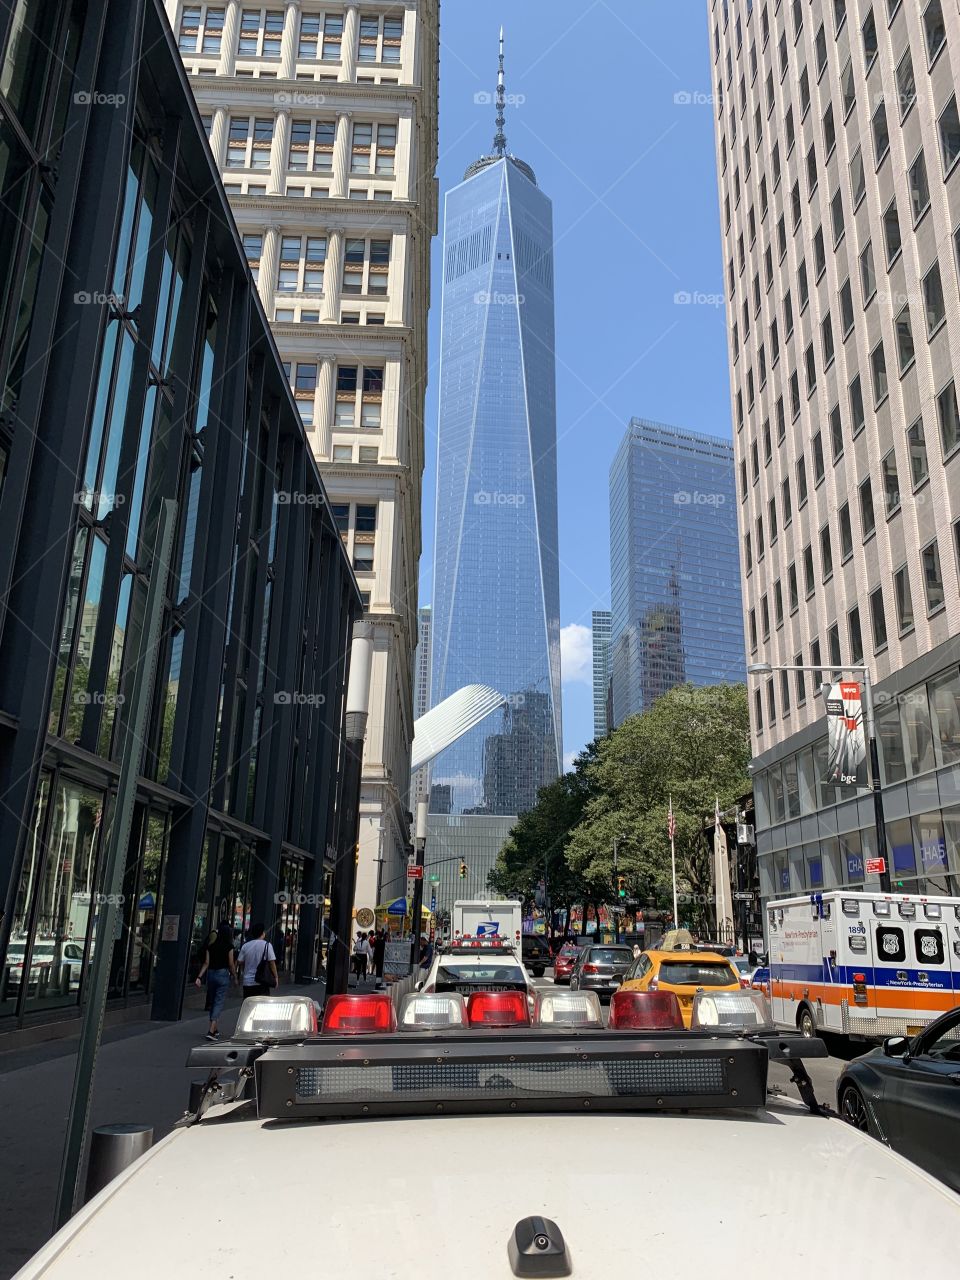 Freedom Tower and the Nypd 